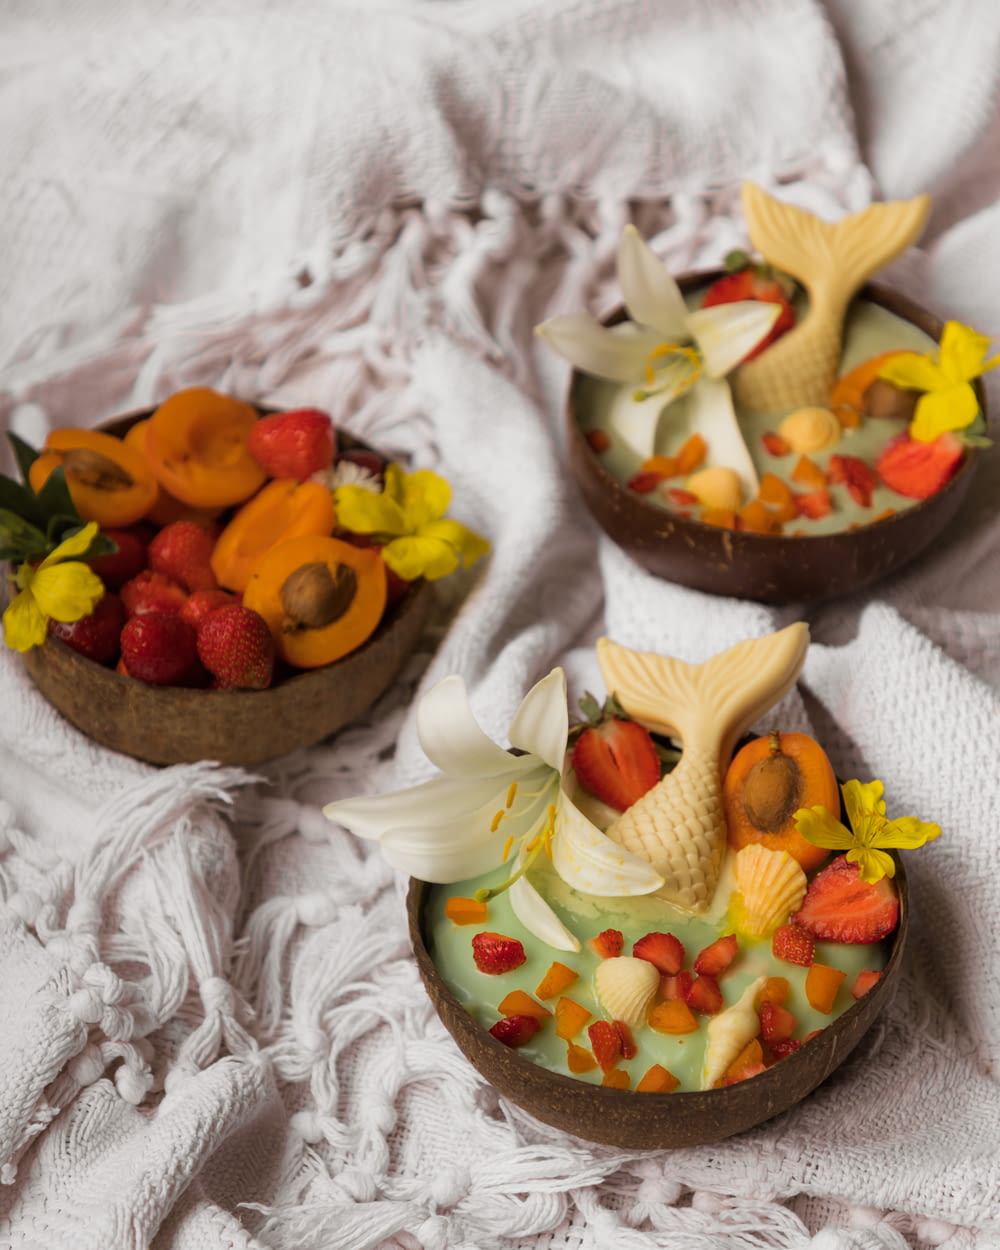 three small bowls filled with fruit and flowers